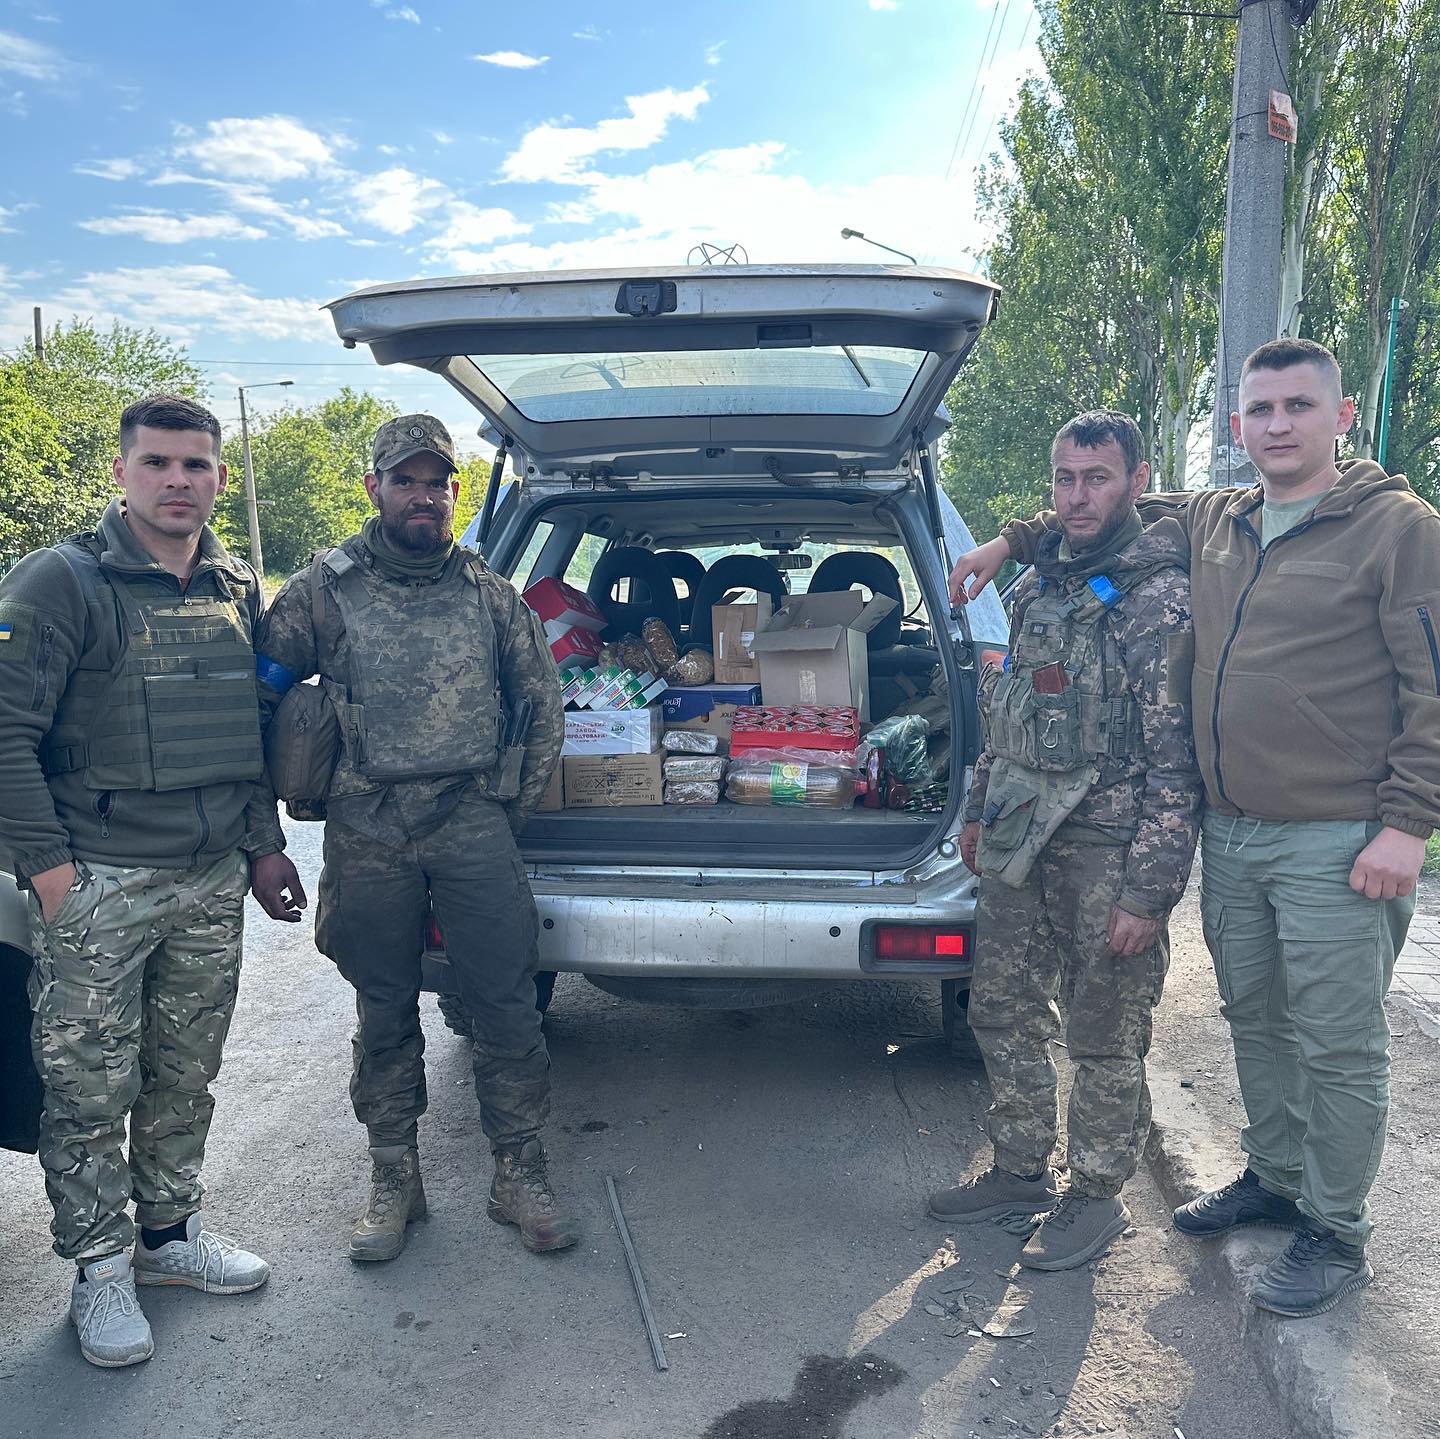 Four men in military attire stand outside by an open vehicle filled with boxes and supplies, offering Hope for Ukraine. Trees and a power pole are visible in the background.